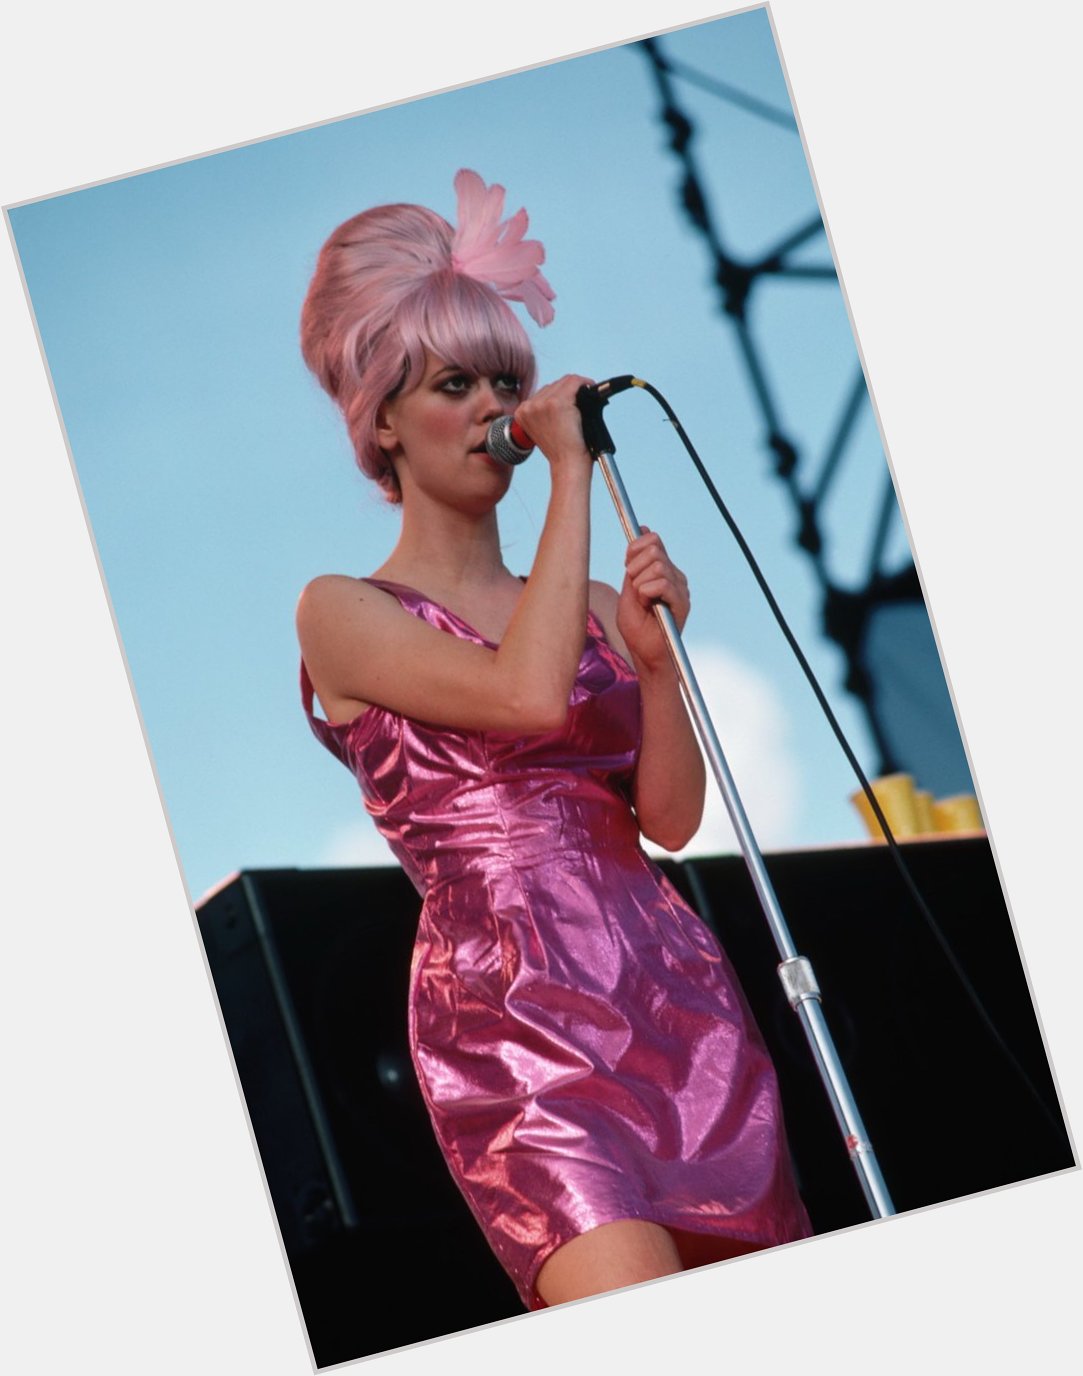 Happy Birthday to Cindy Wilson born on this day in 1957 